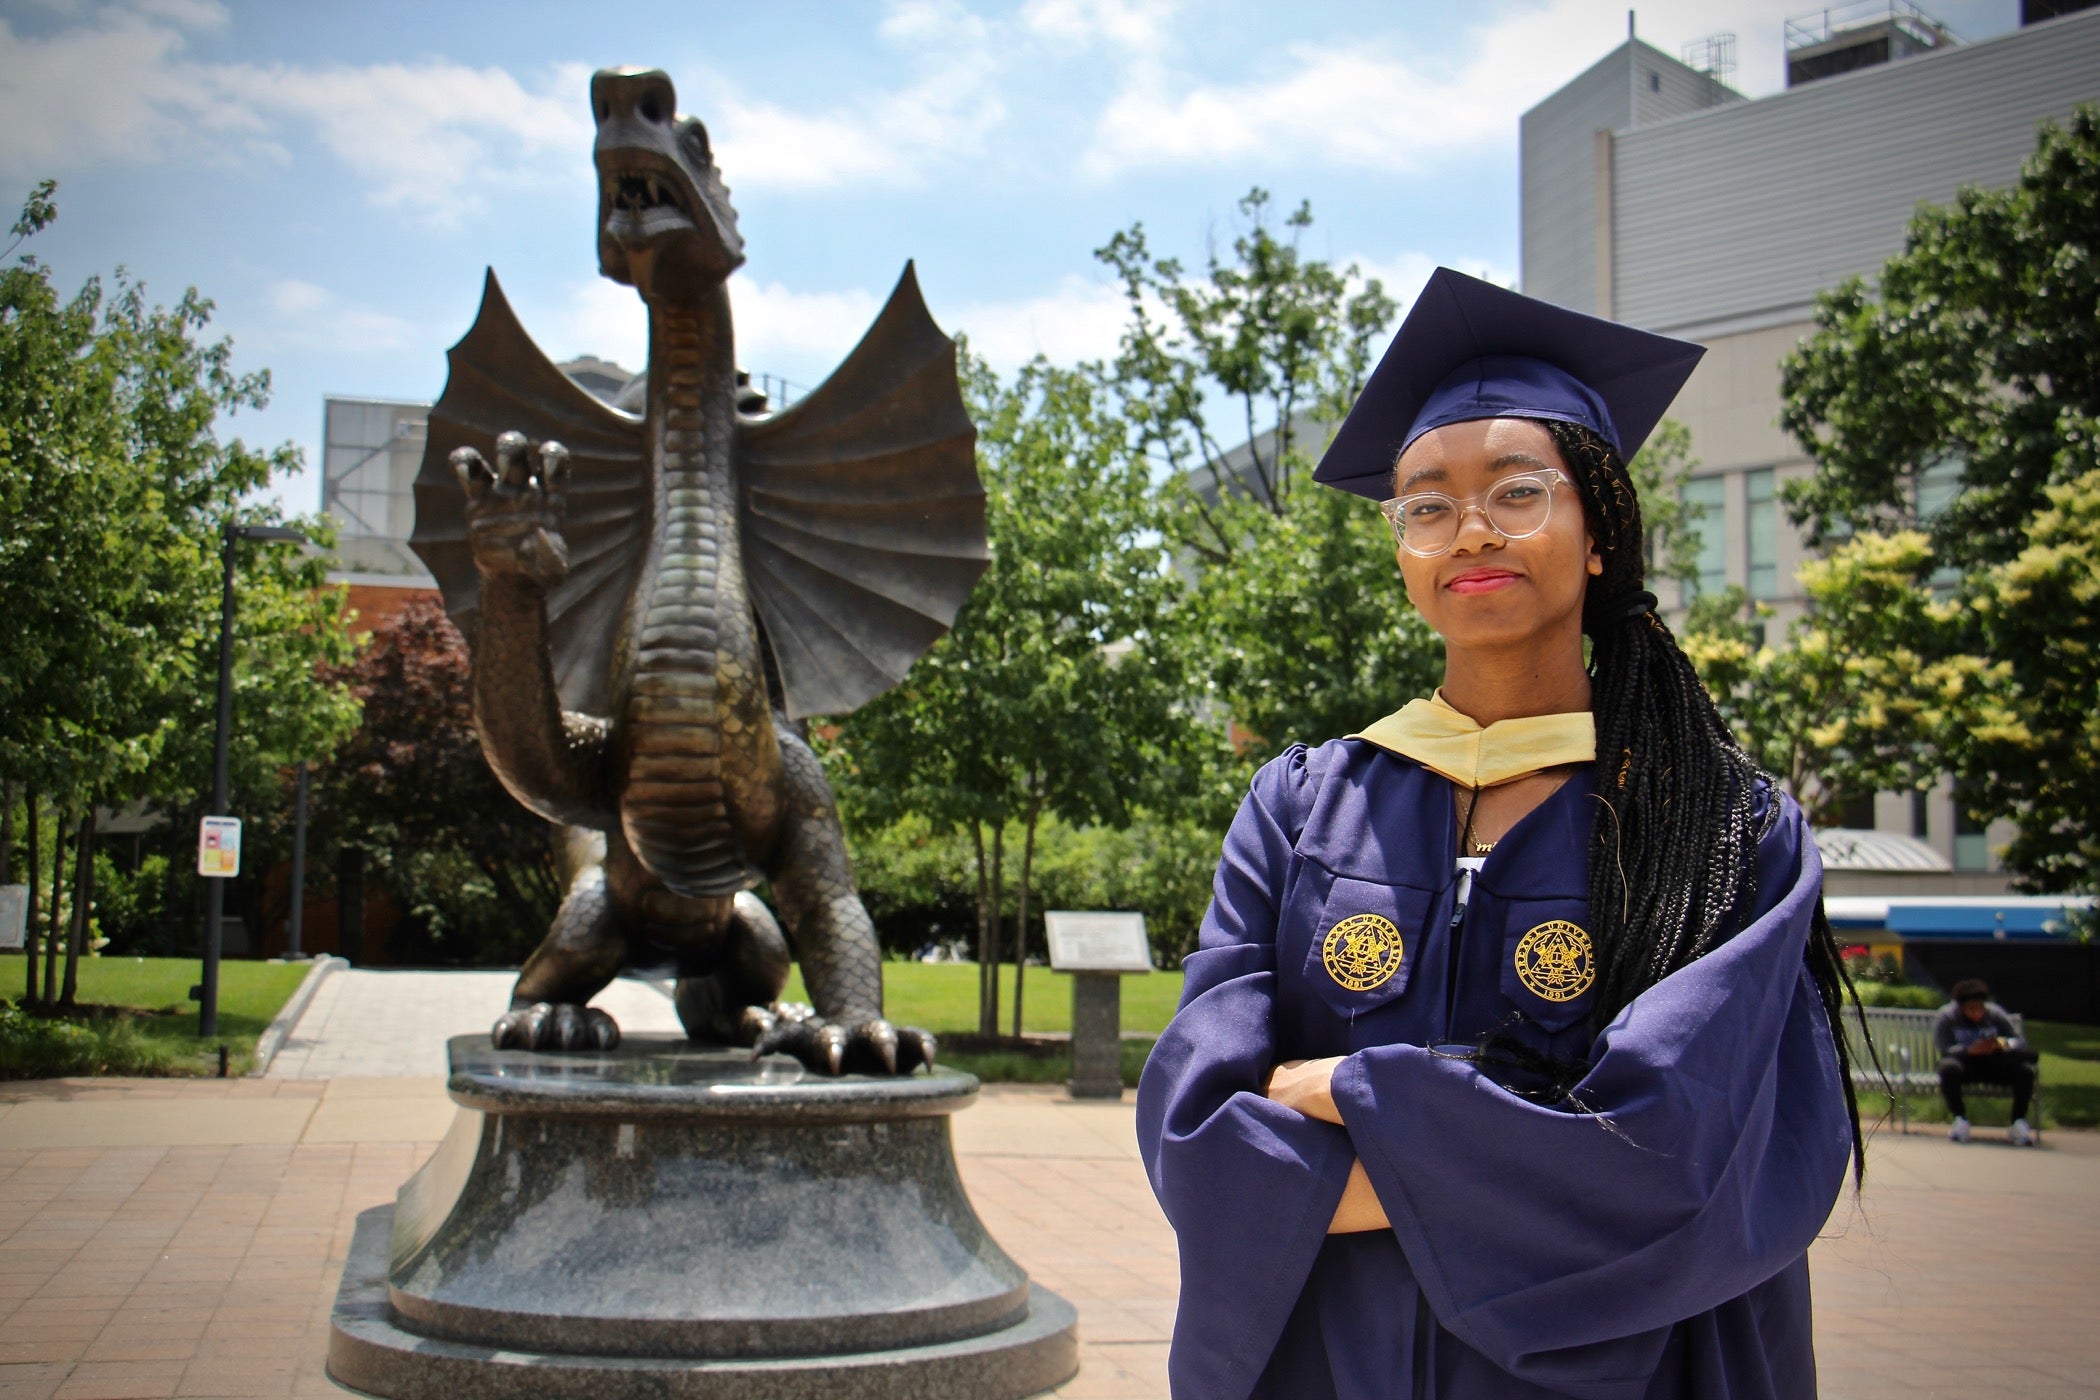 A young Black woman wearing a graduation cap and gown stands, arms crossed, next to a statue of Drexel University's dragon mascot.